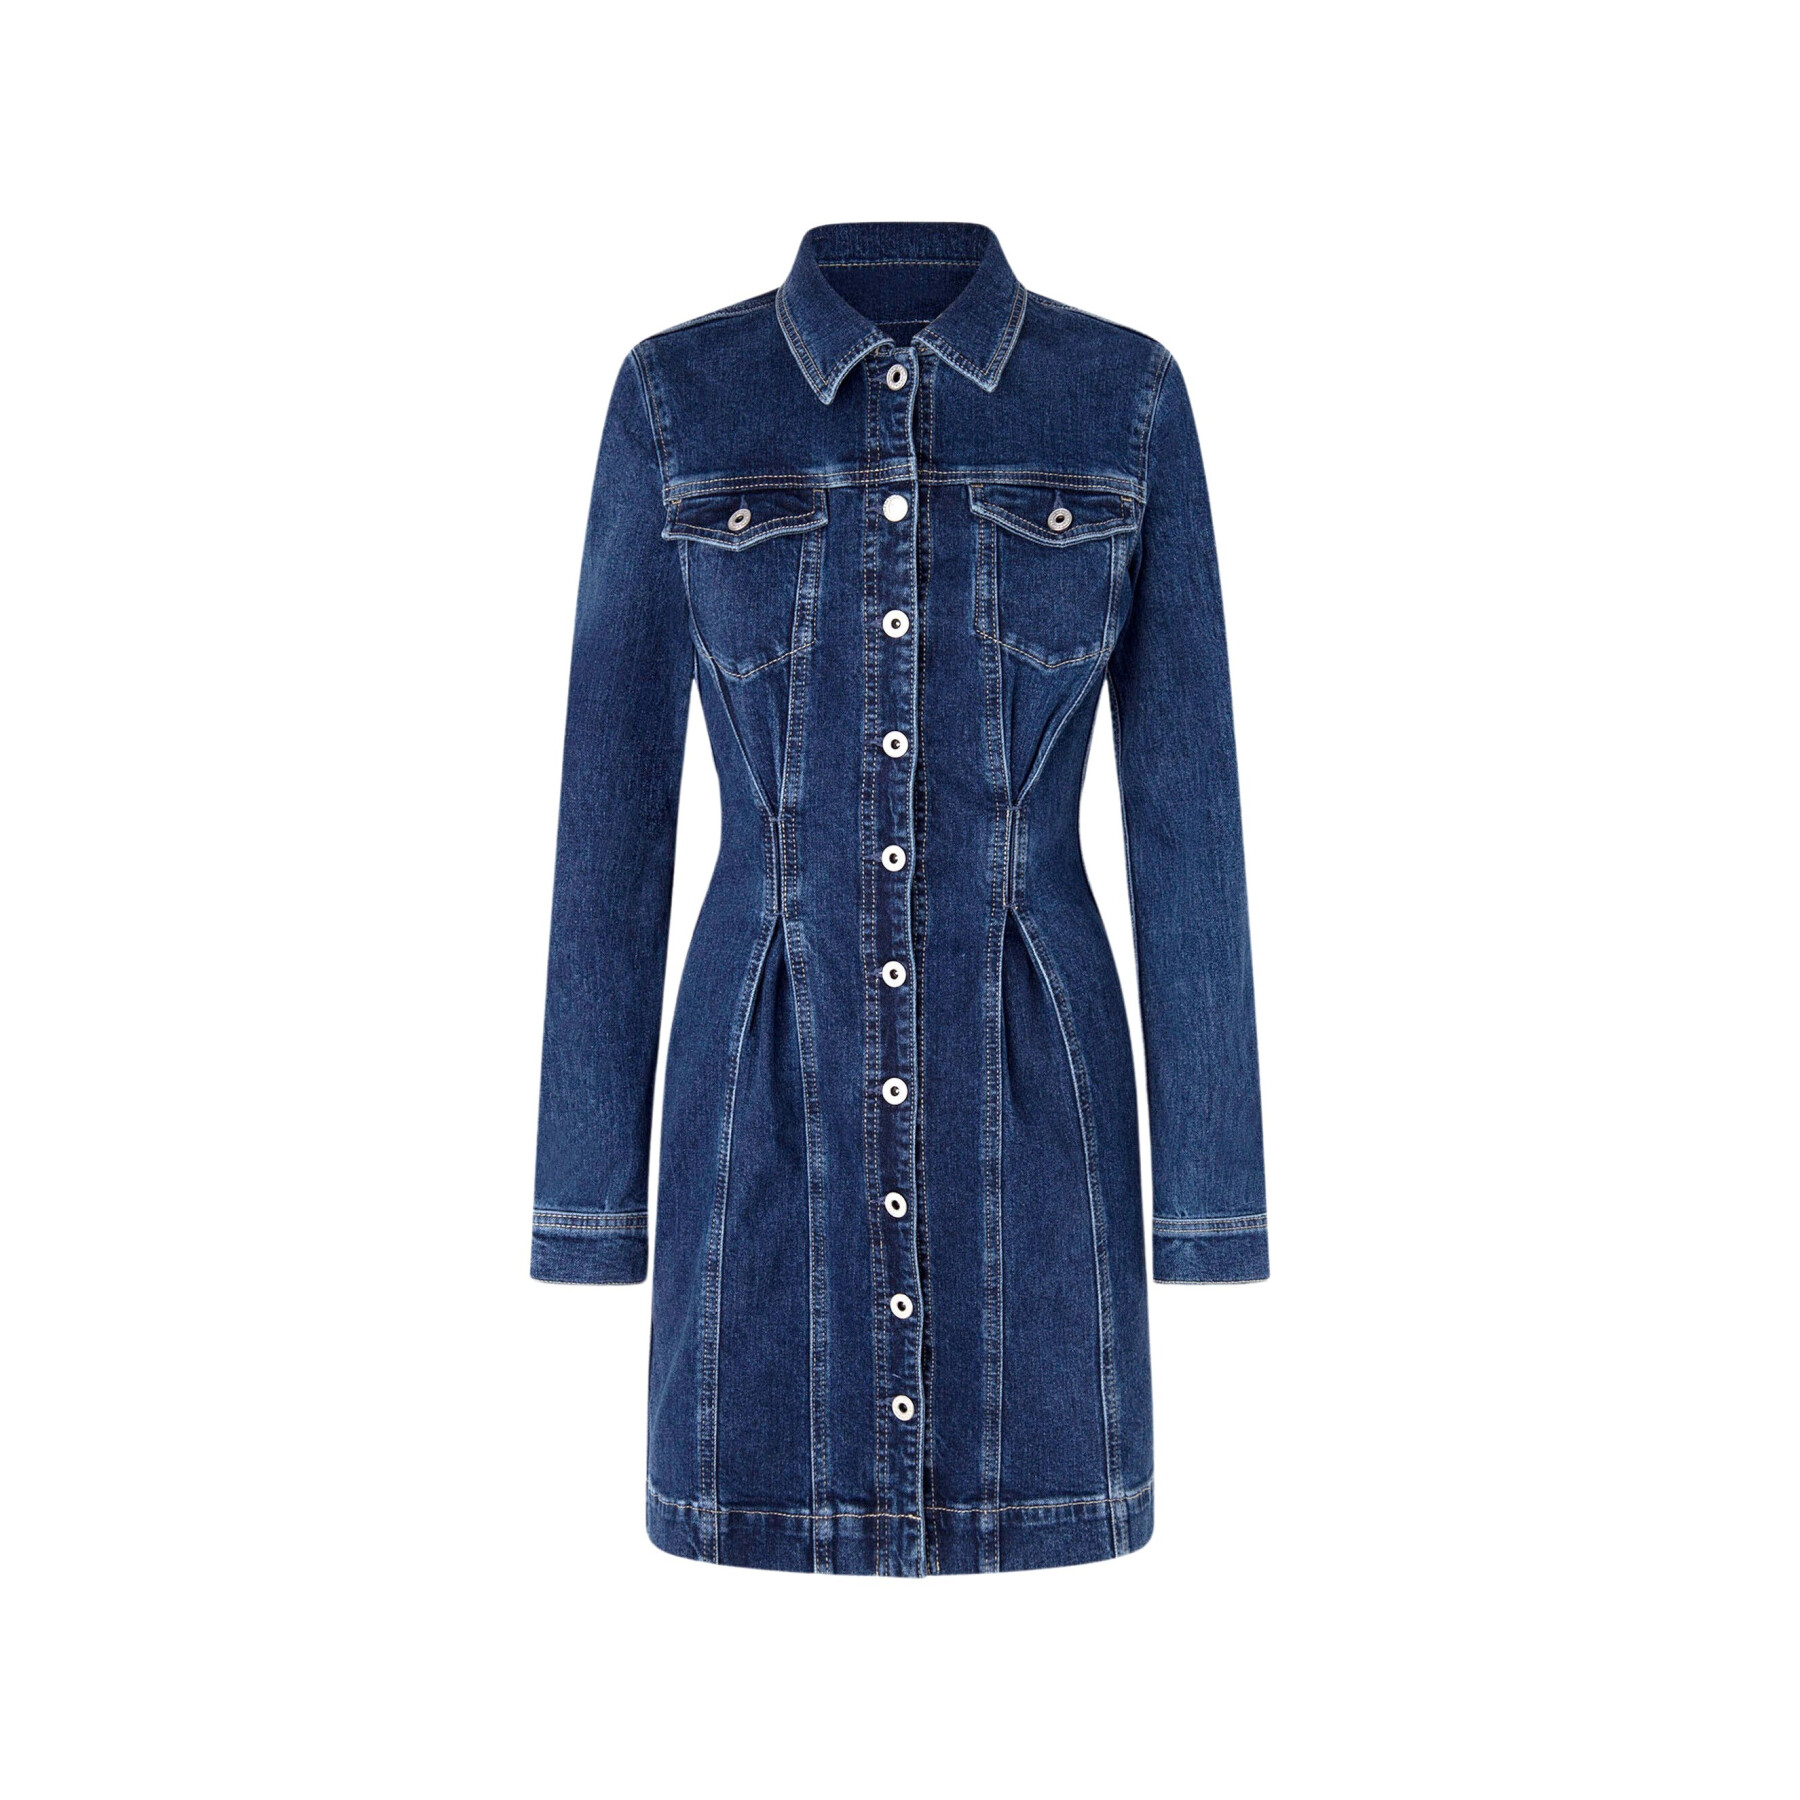 Women's dress Pepe Jeans Candie